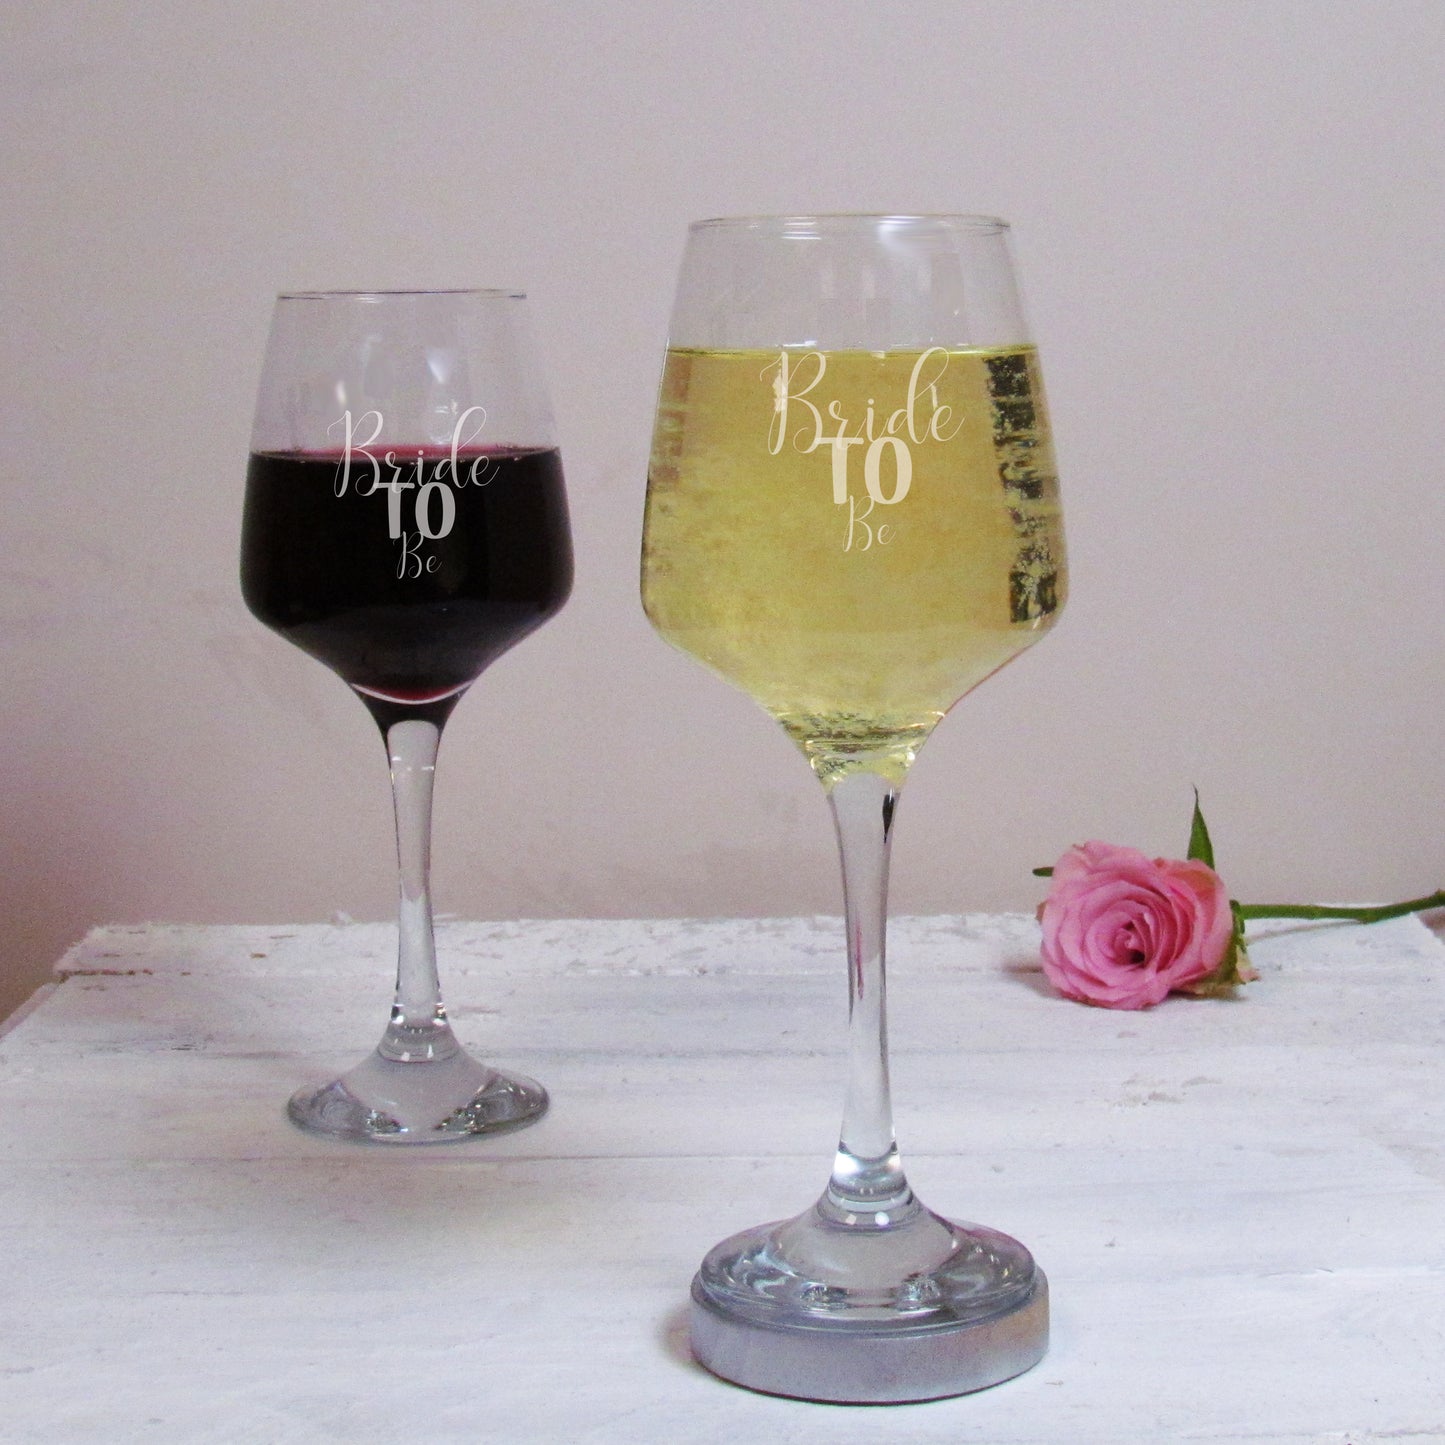 Personalised engraved Bride to be wine glass